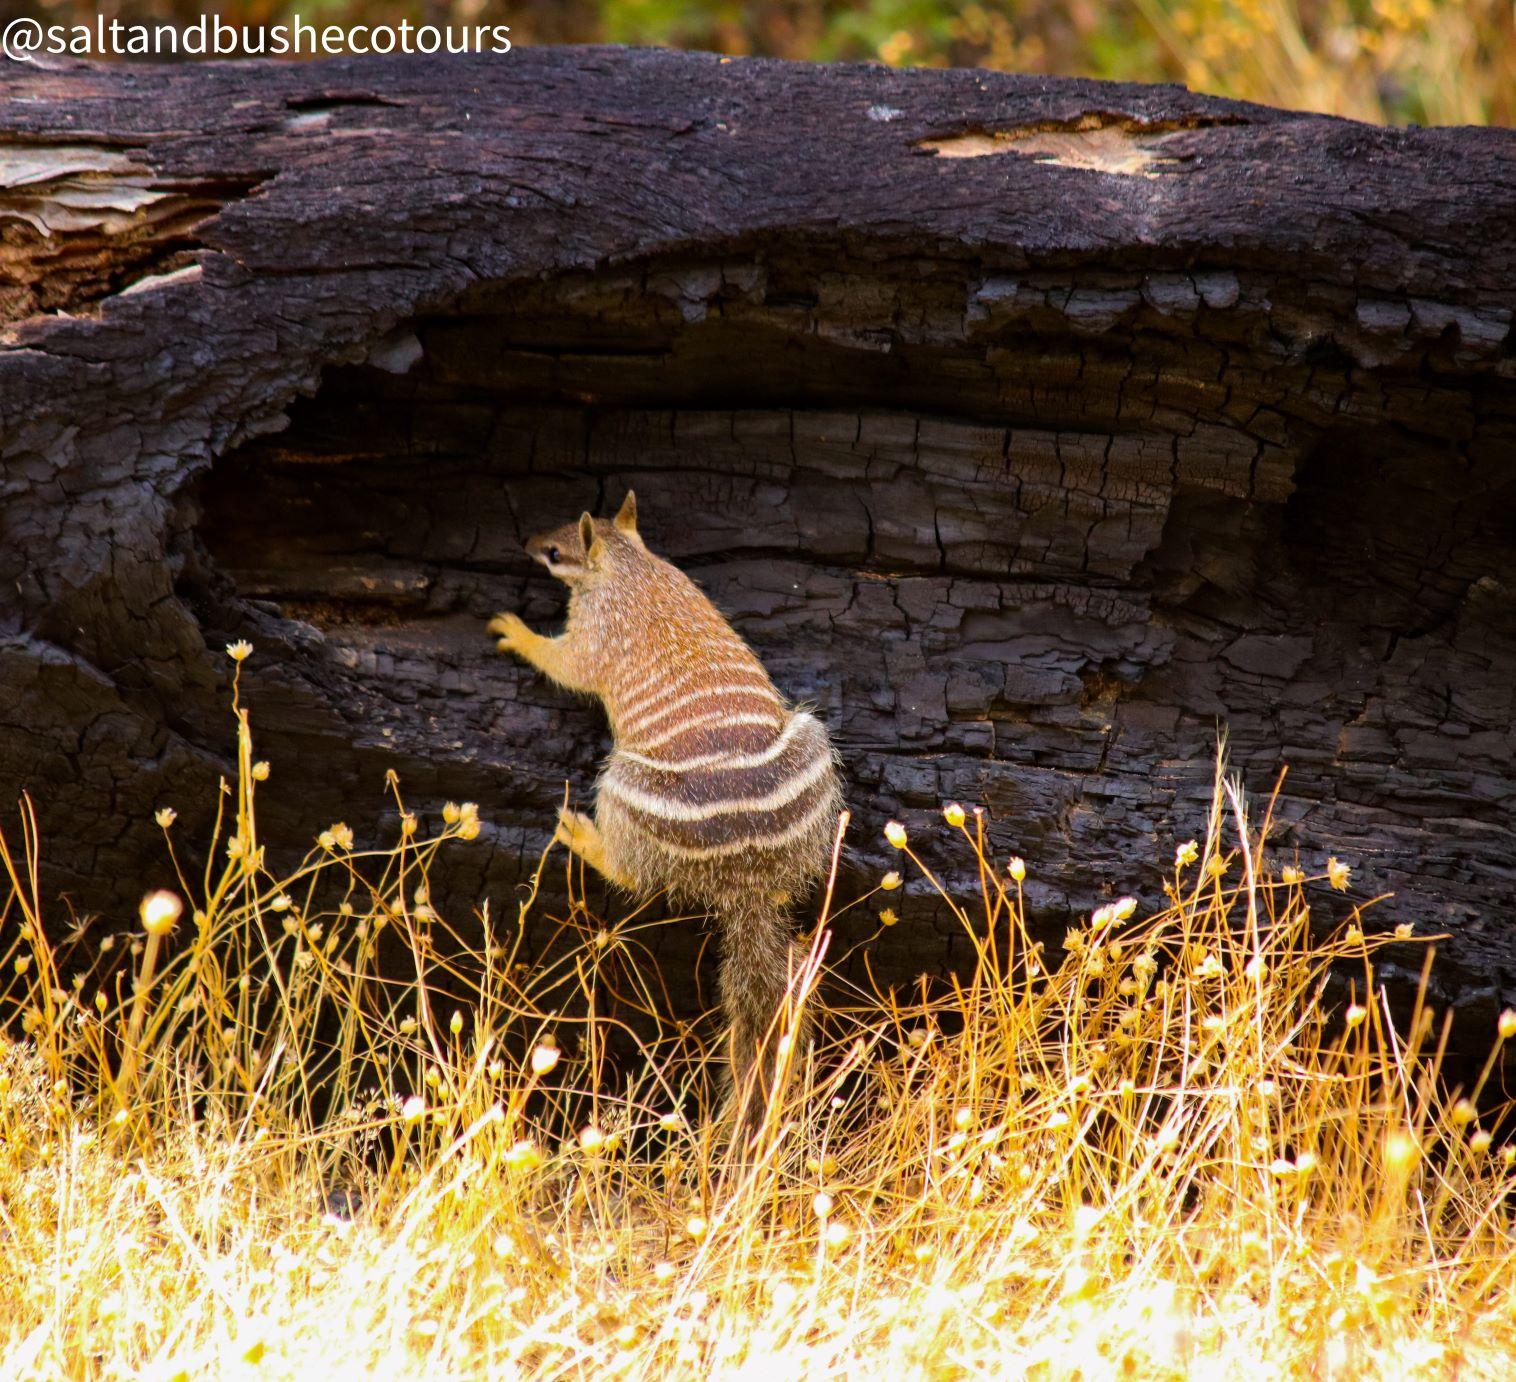 A numbat from behind, stripes on a small marsupial